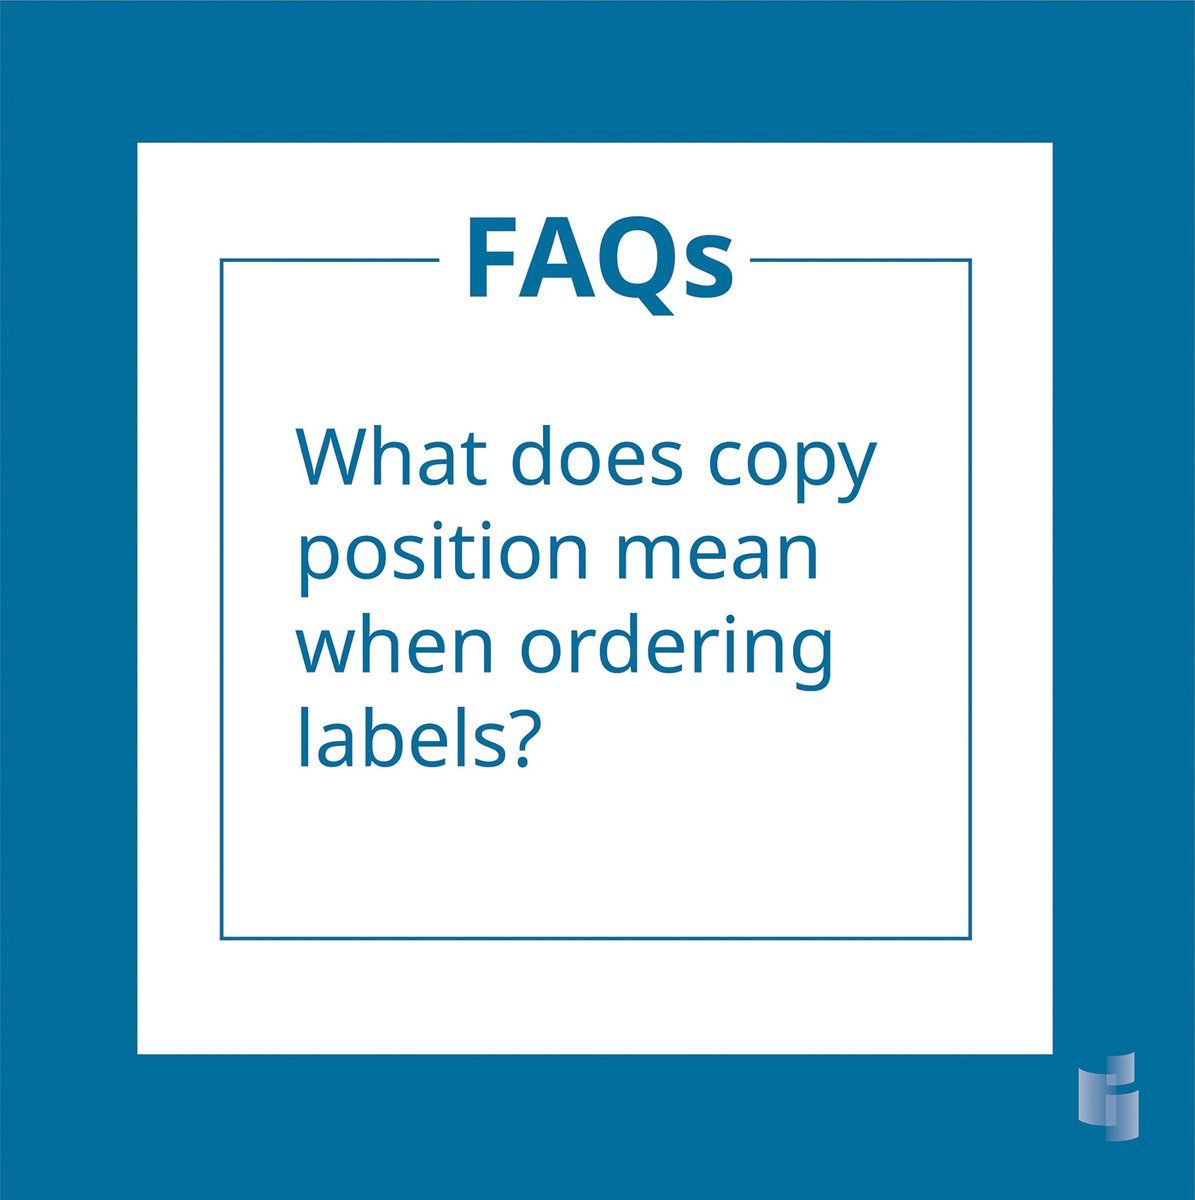 Copy position (also known as unwind direction) refers to the orientation of the labels as they come off of the roll (i.e. as you unwind the roll of labels).

#inovarlocations #inovarinspirations #inovarpackaginggroup #nationwide #copyposition #labelunwind